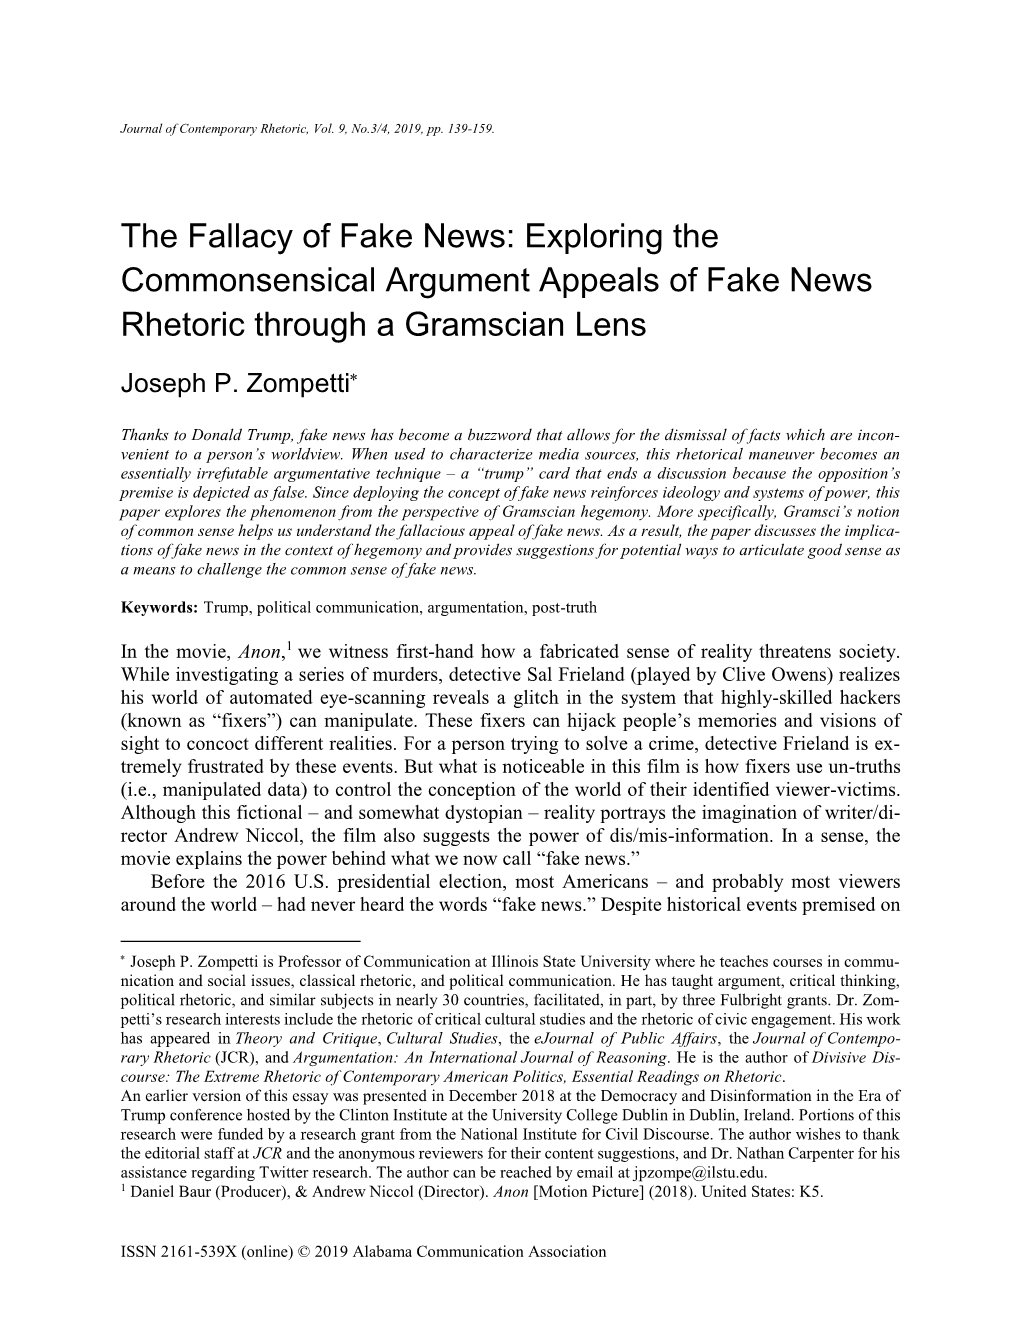 The Fallacy of Fake News: Exploring the Commonsensical Argument Appeals of Fake News Rhetoric Through a Gramscian Lens